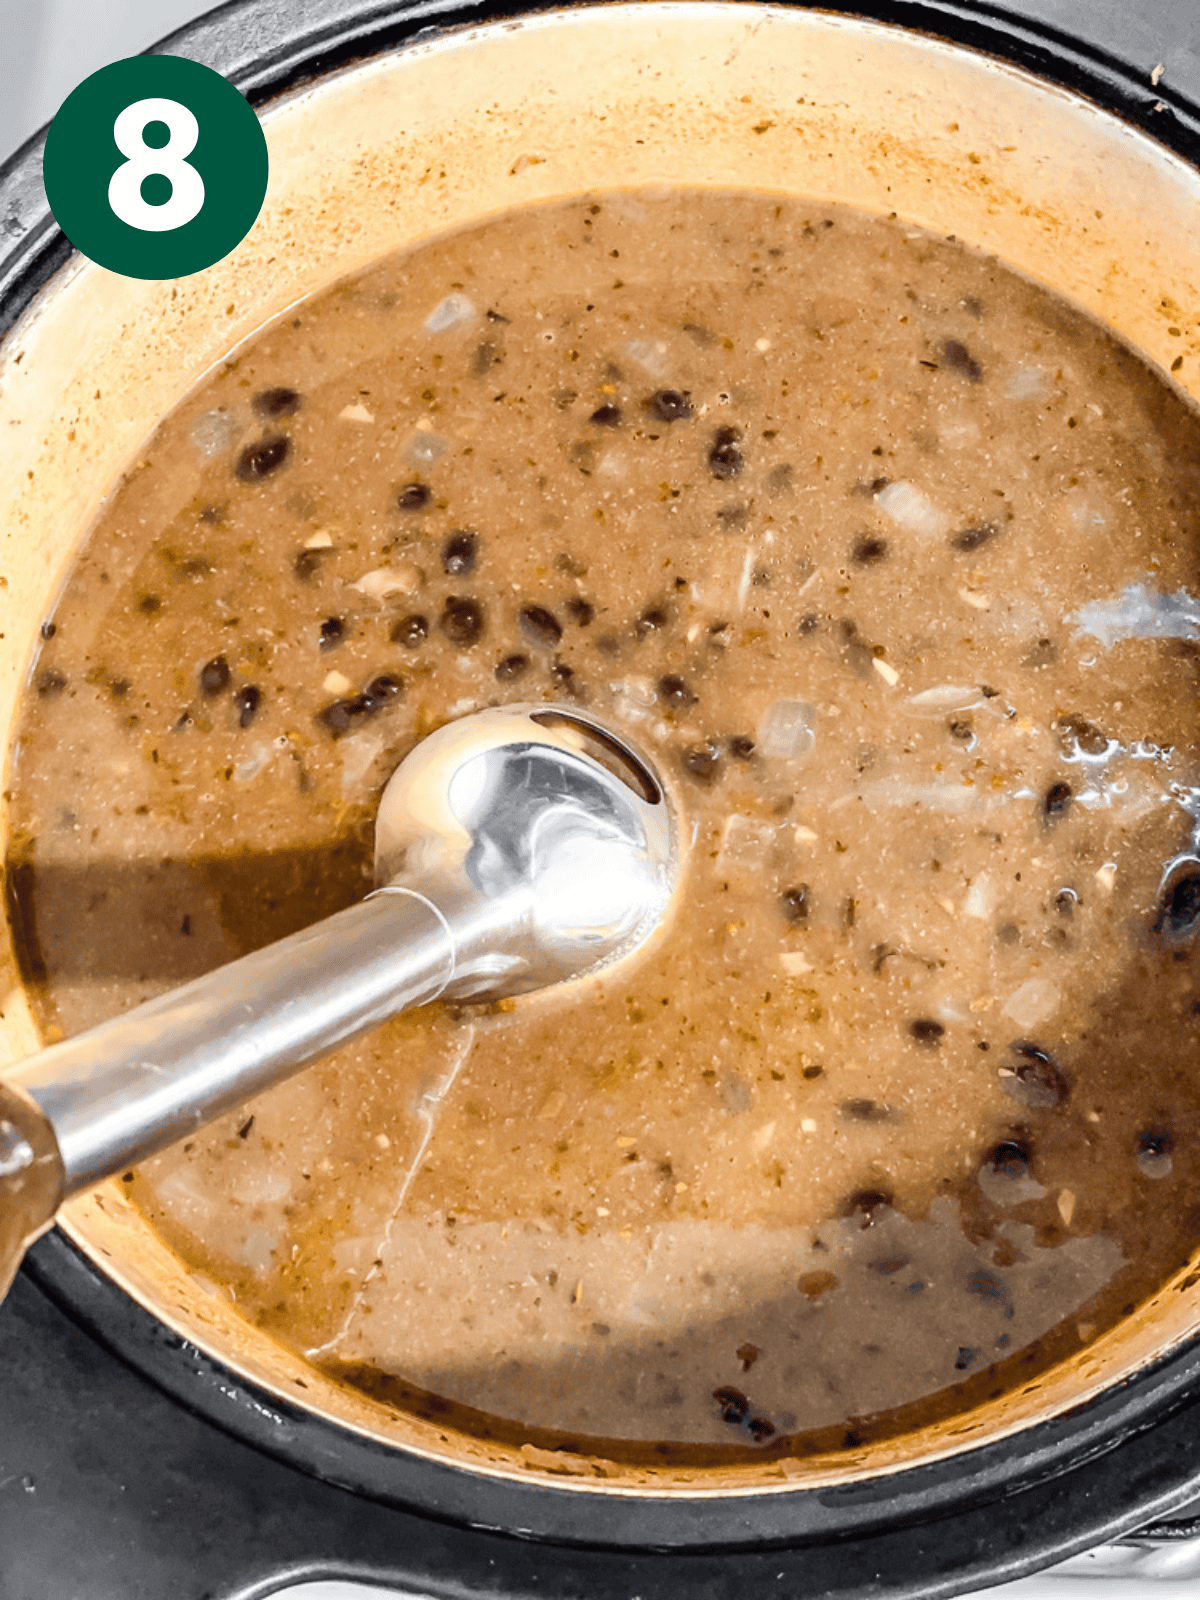 pureeing black bean soup with an immersion blender.